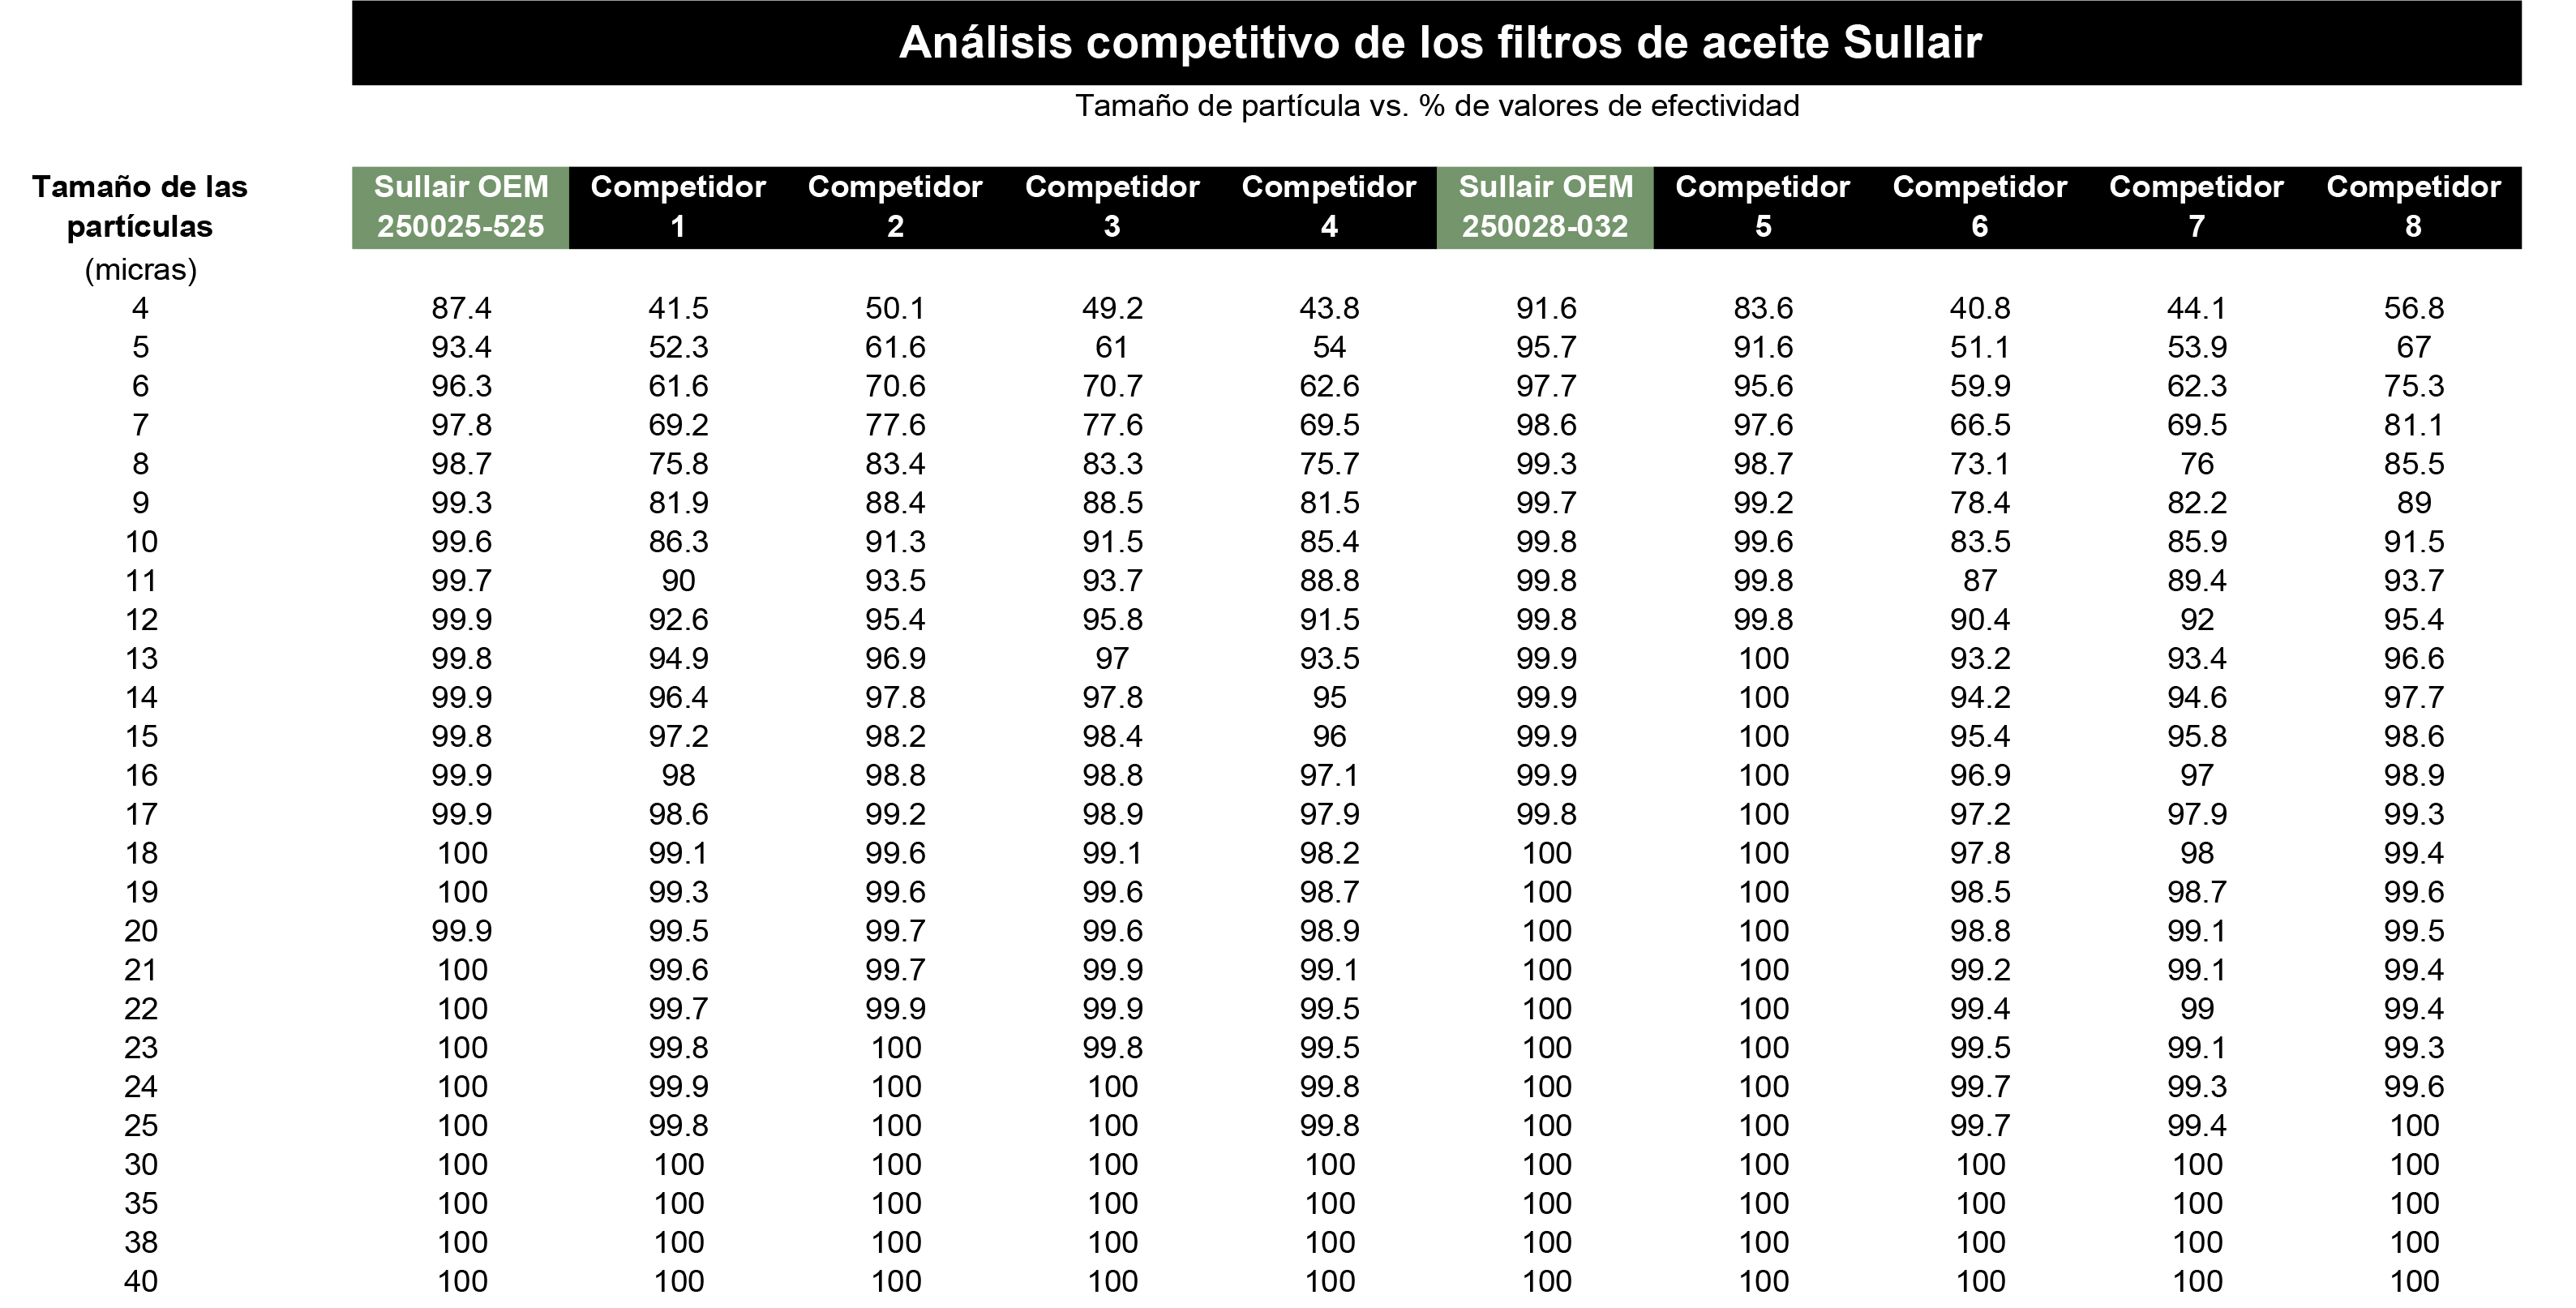 Donaldson Oil Filter Competitive Analysis Data